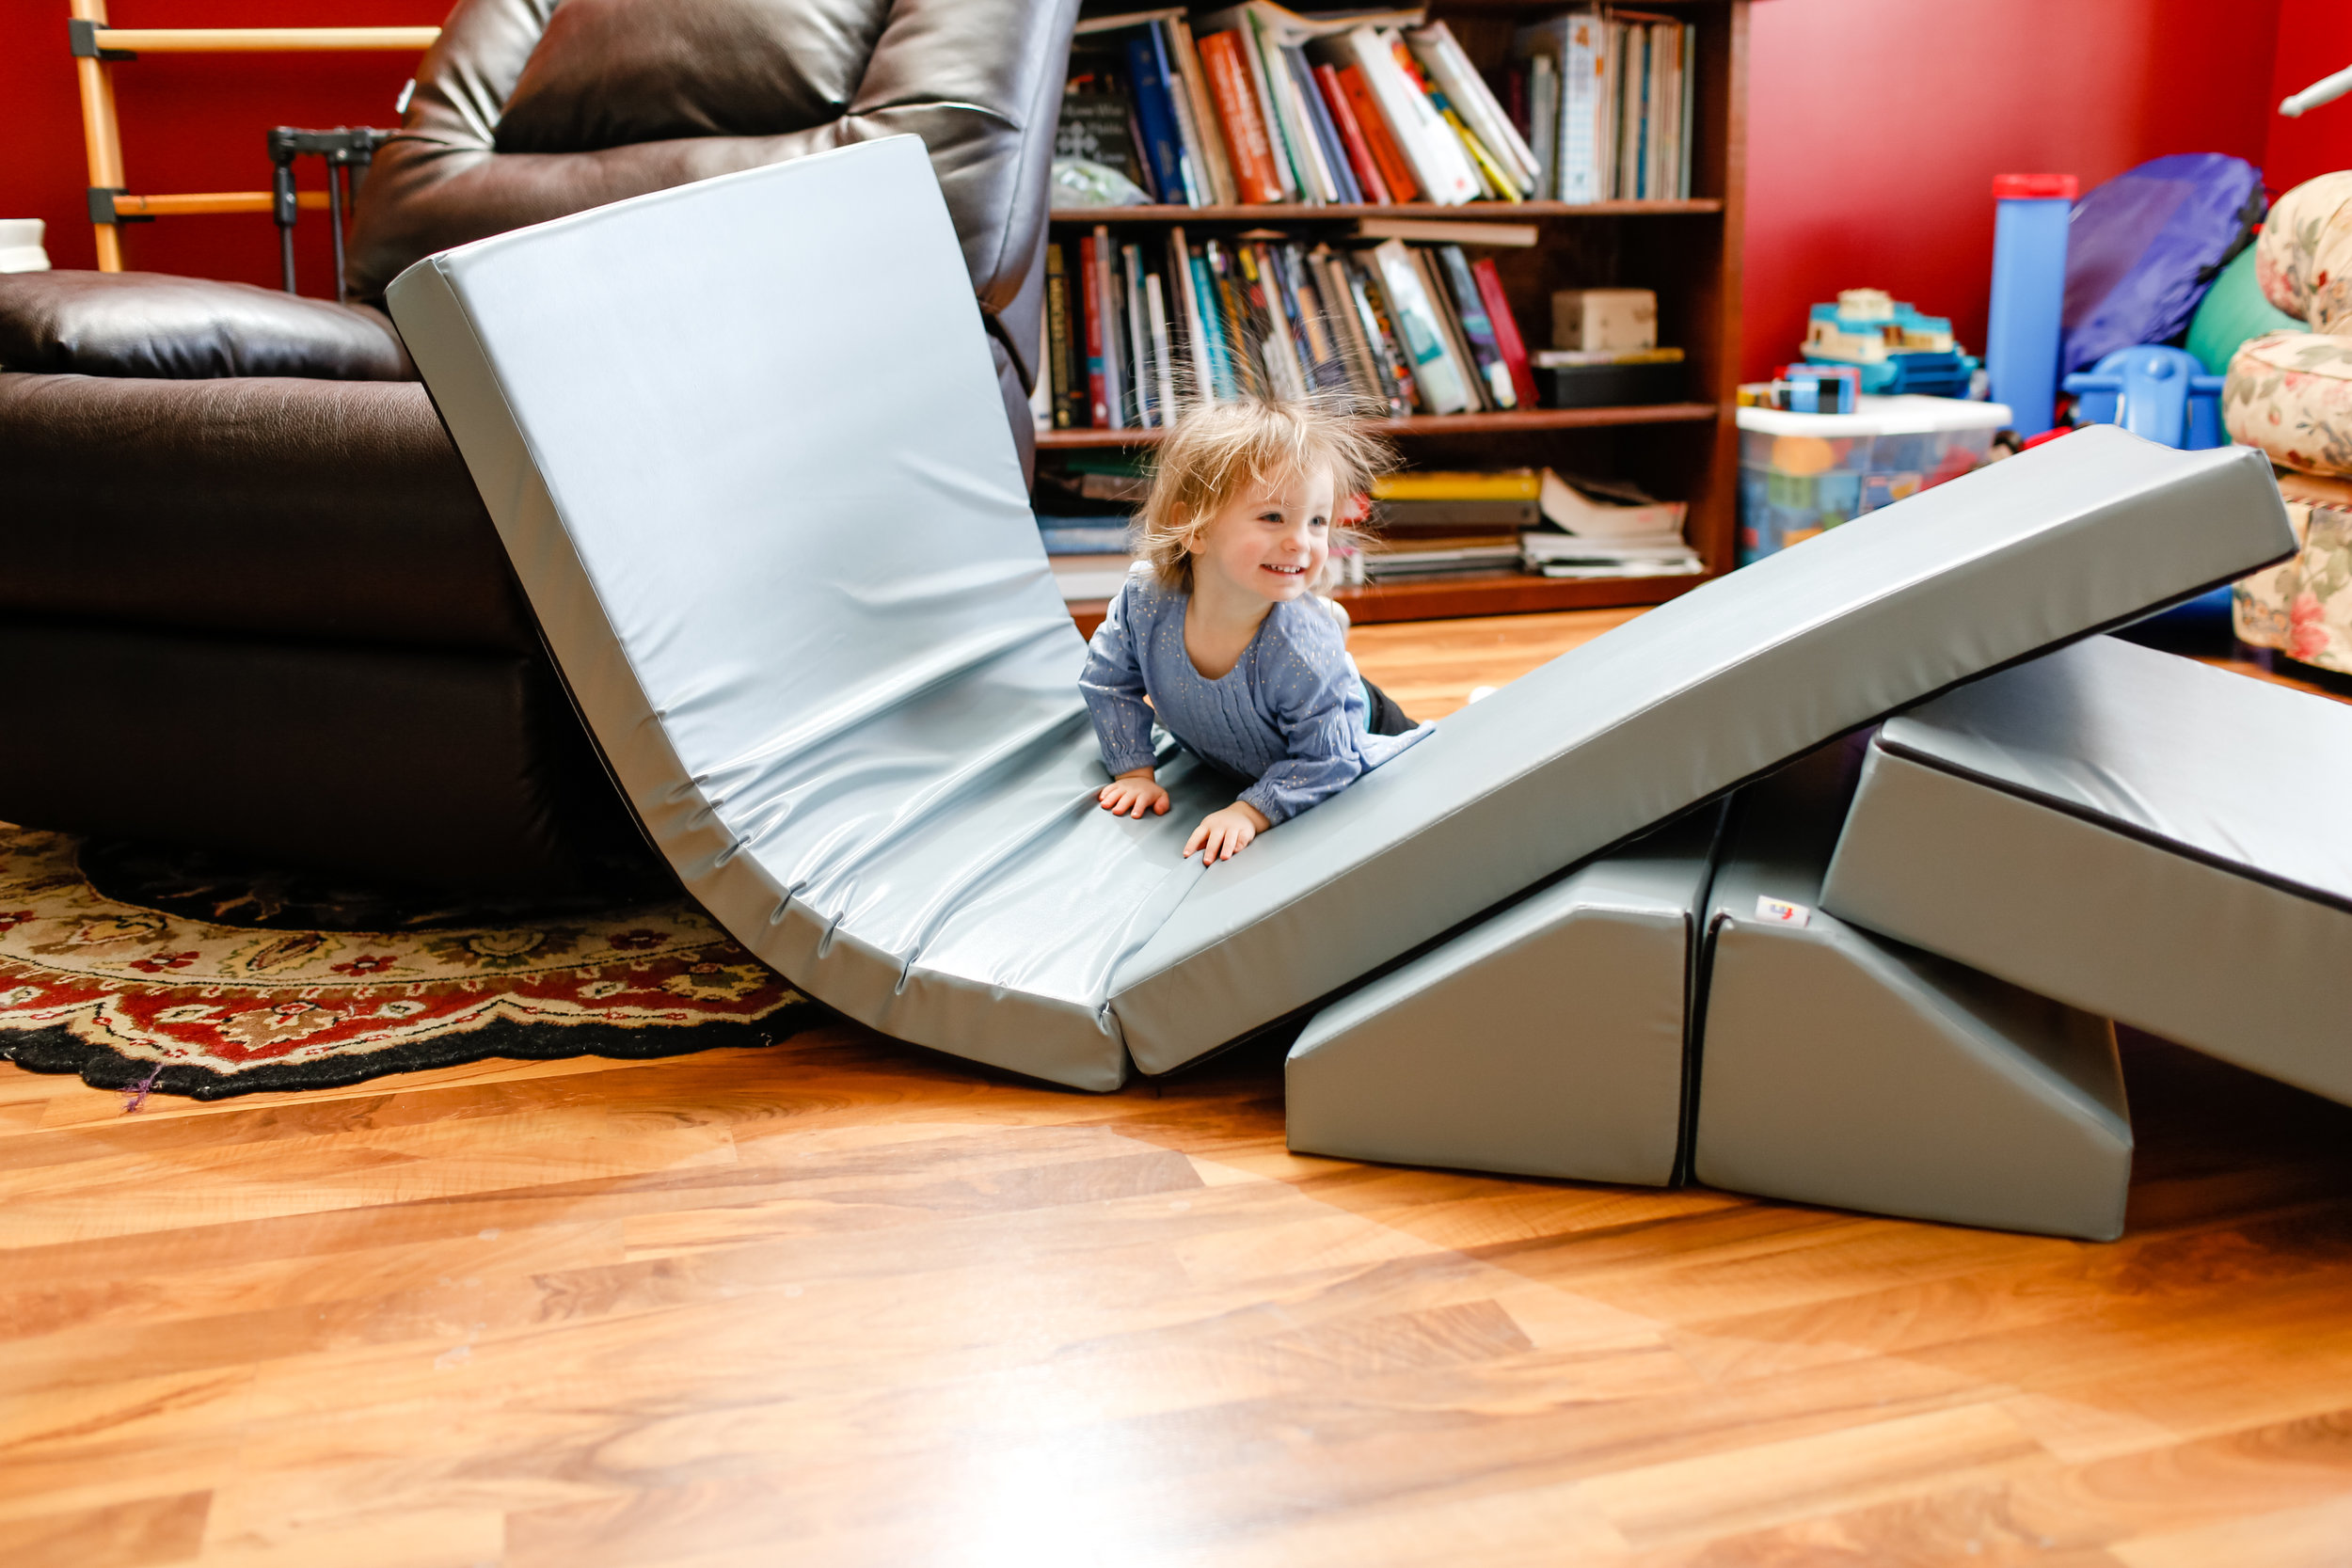 foam couch for kids